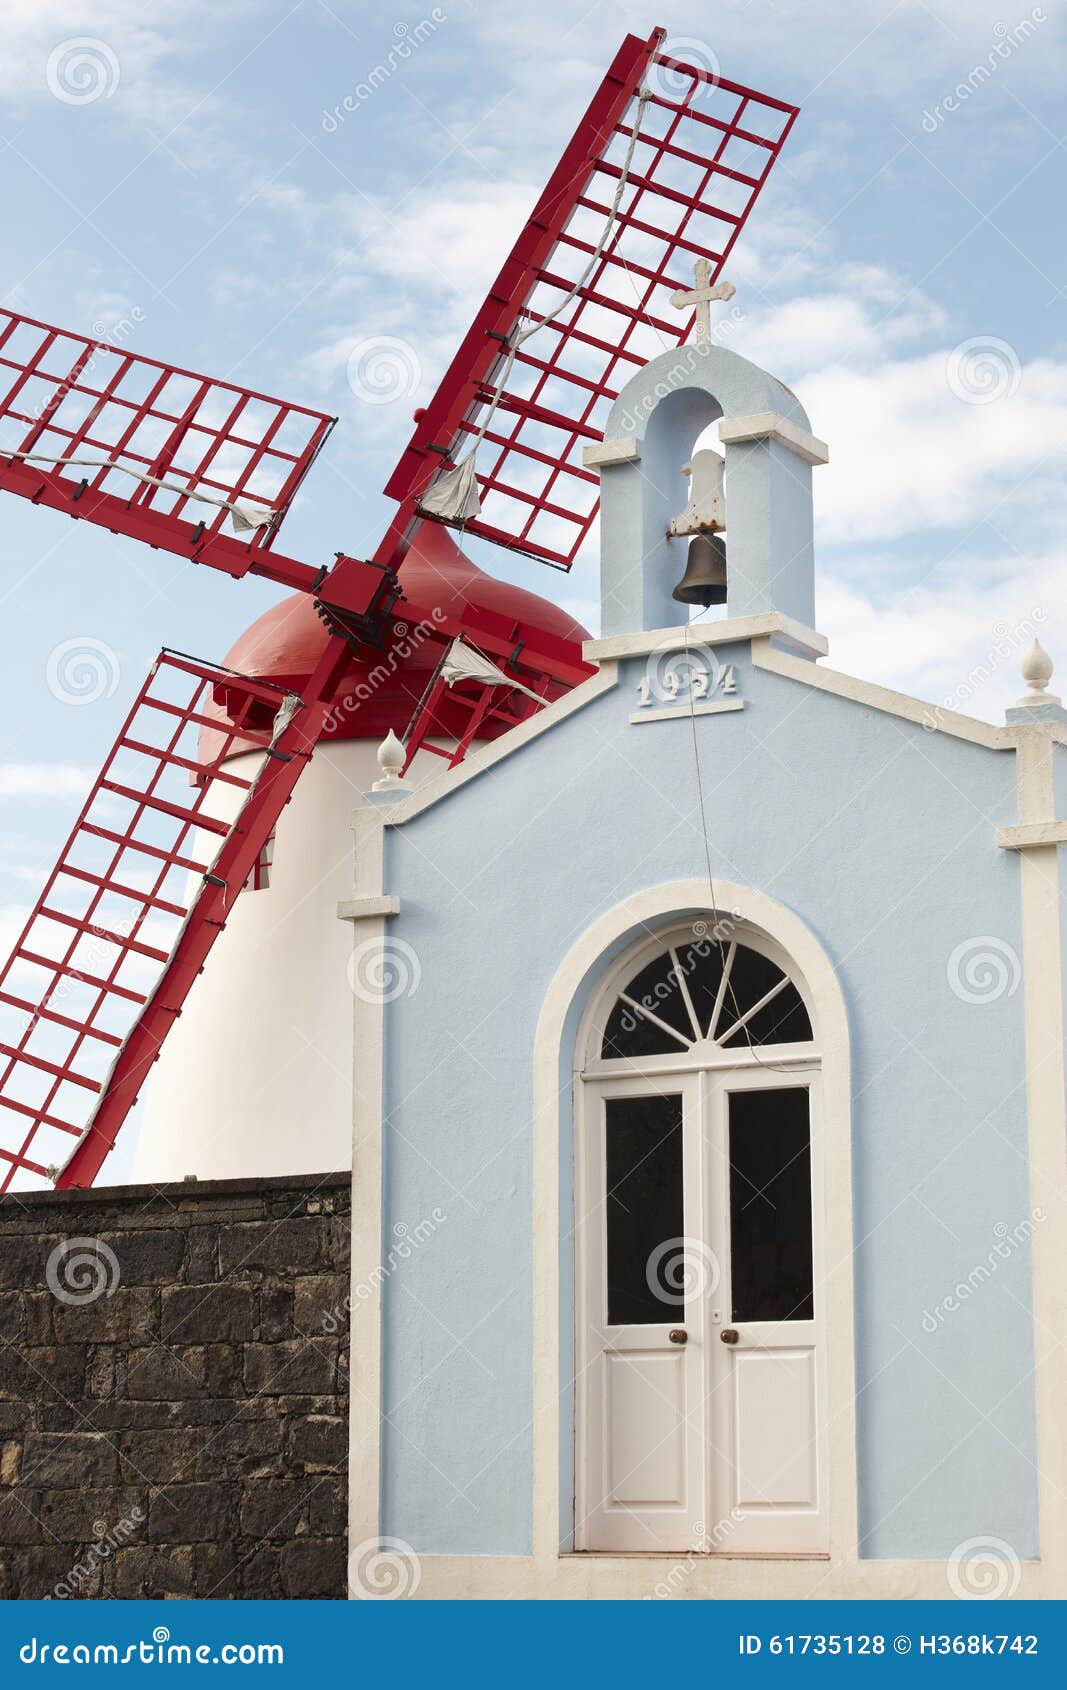 azores traditional chapel, imperio, and windmill in sao miguel.